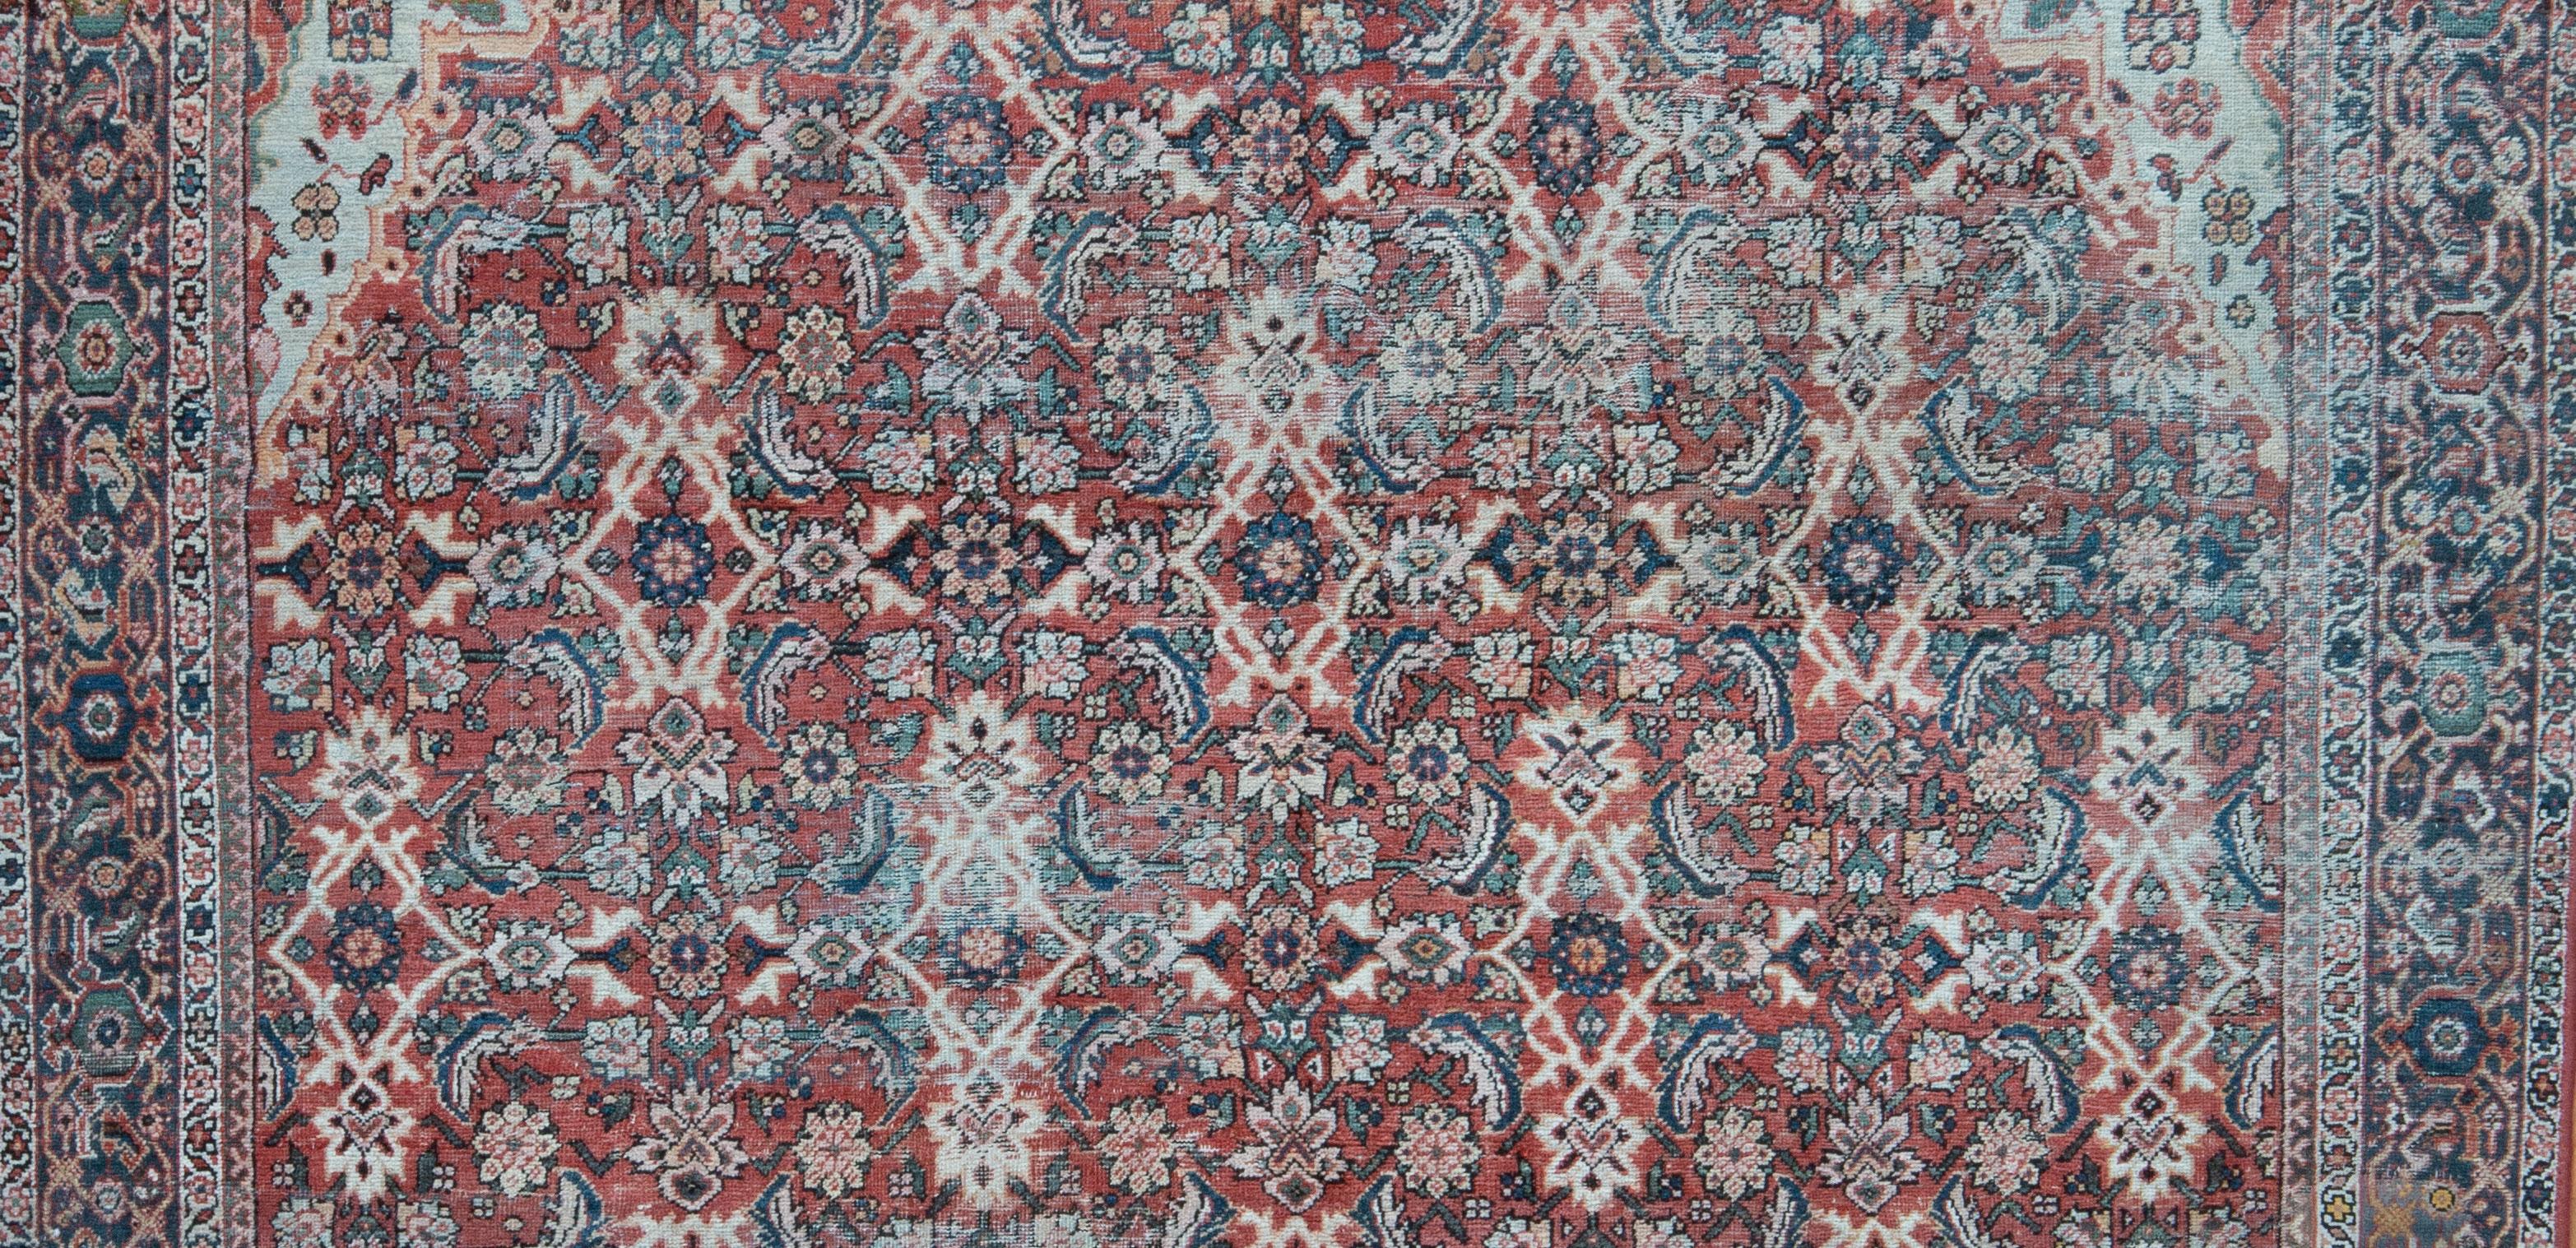 Early 20th Century Distressed Antique Persian Mahal Tribal Square Rug c. 1900s For Sale